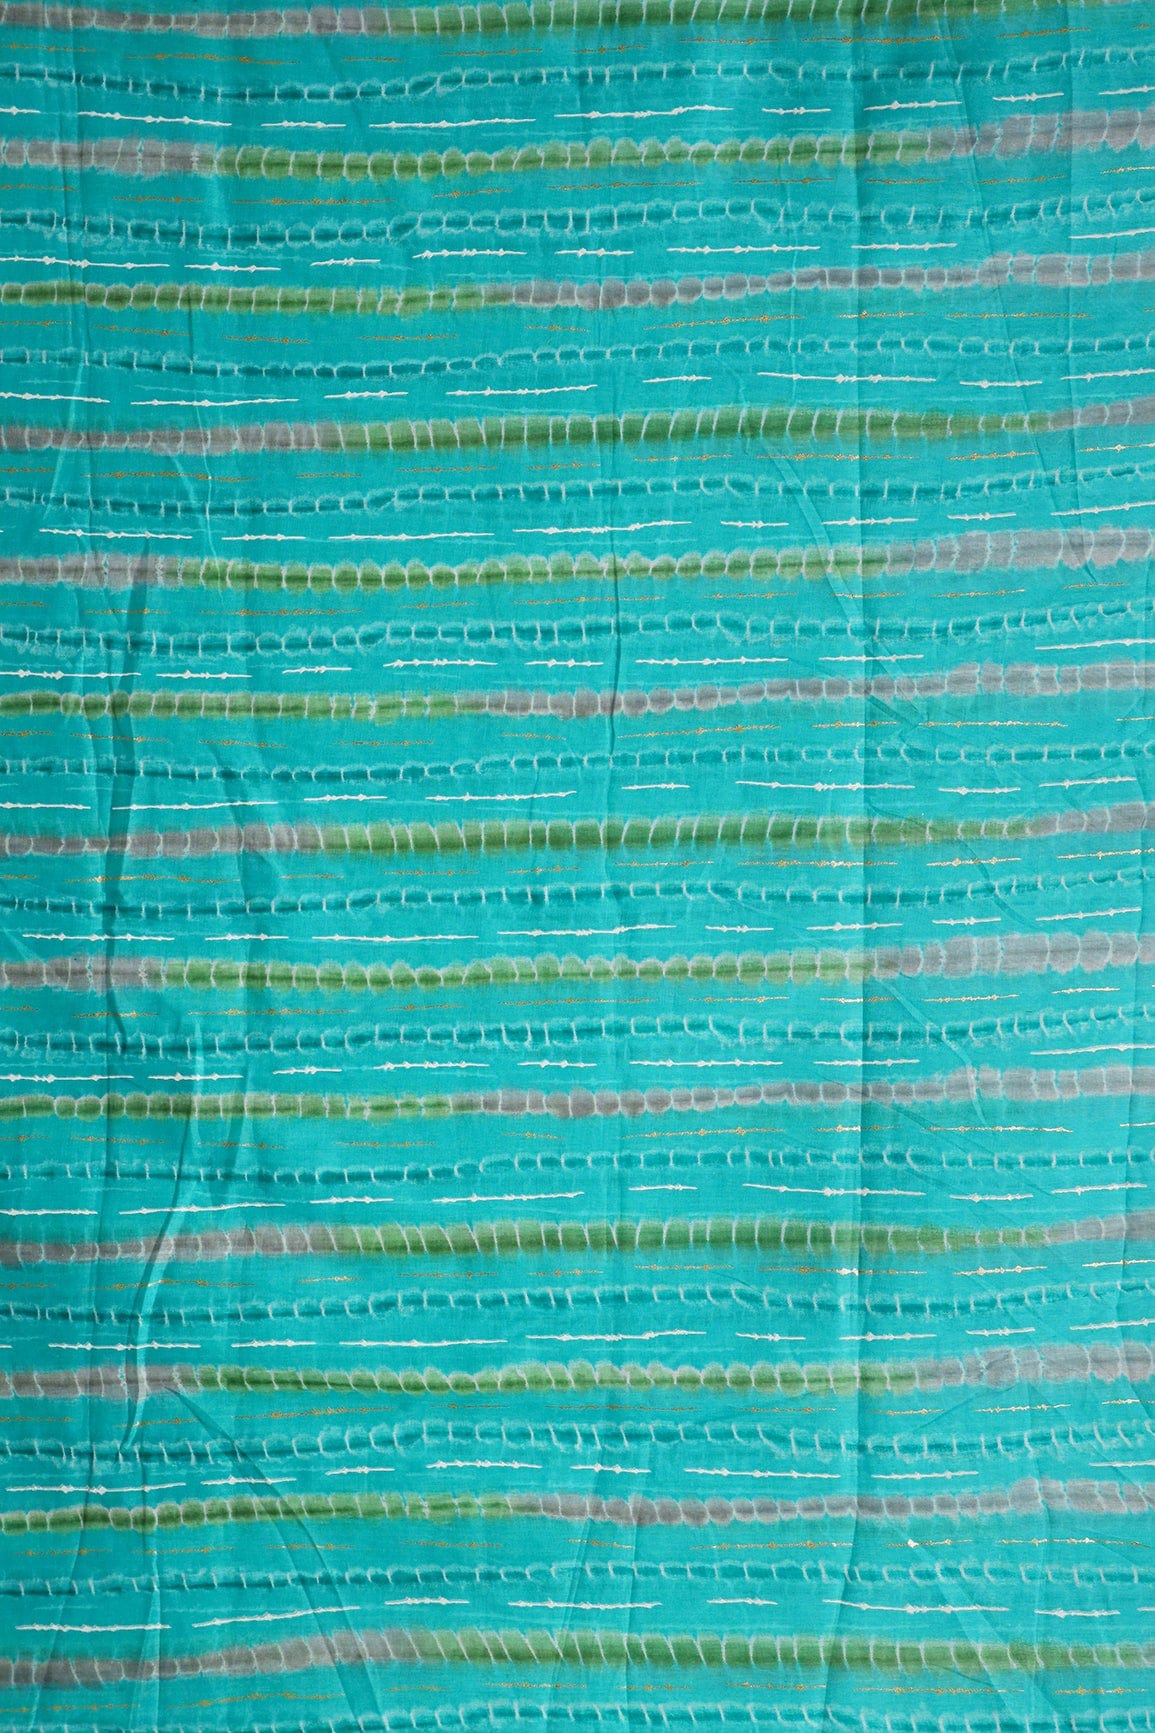 doeraa Prints Olive Green And Grey Stripes Pattern With Foil Print On Turquoise Blue Pure Mul Cotton Fabric